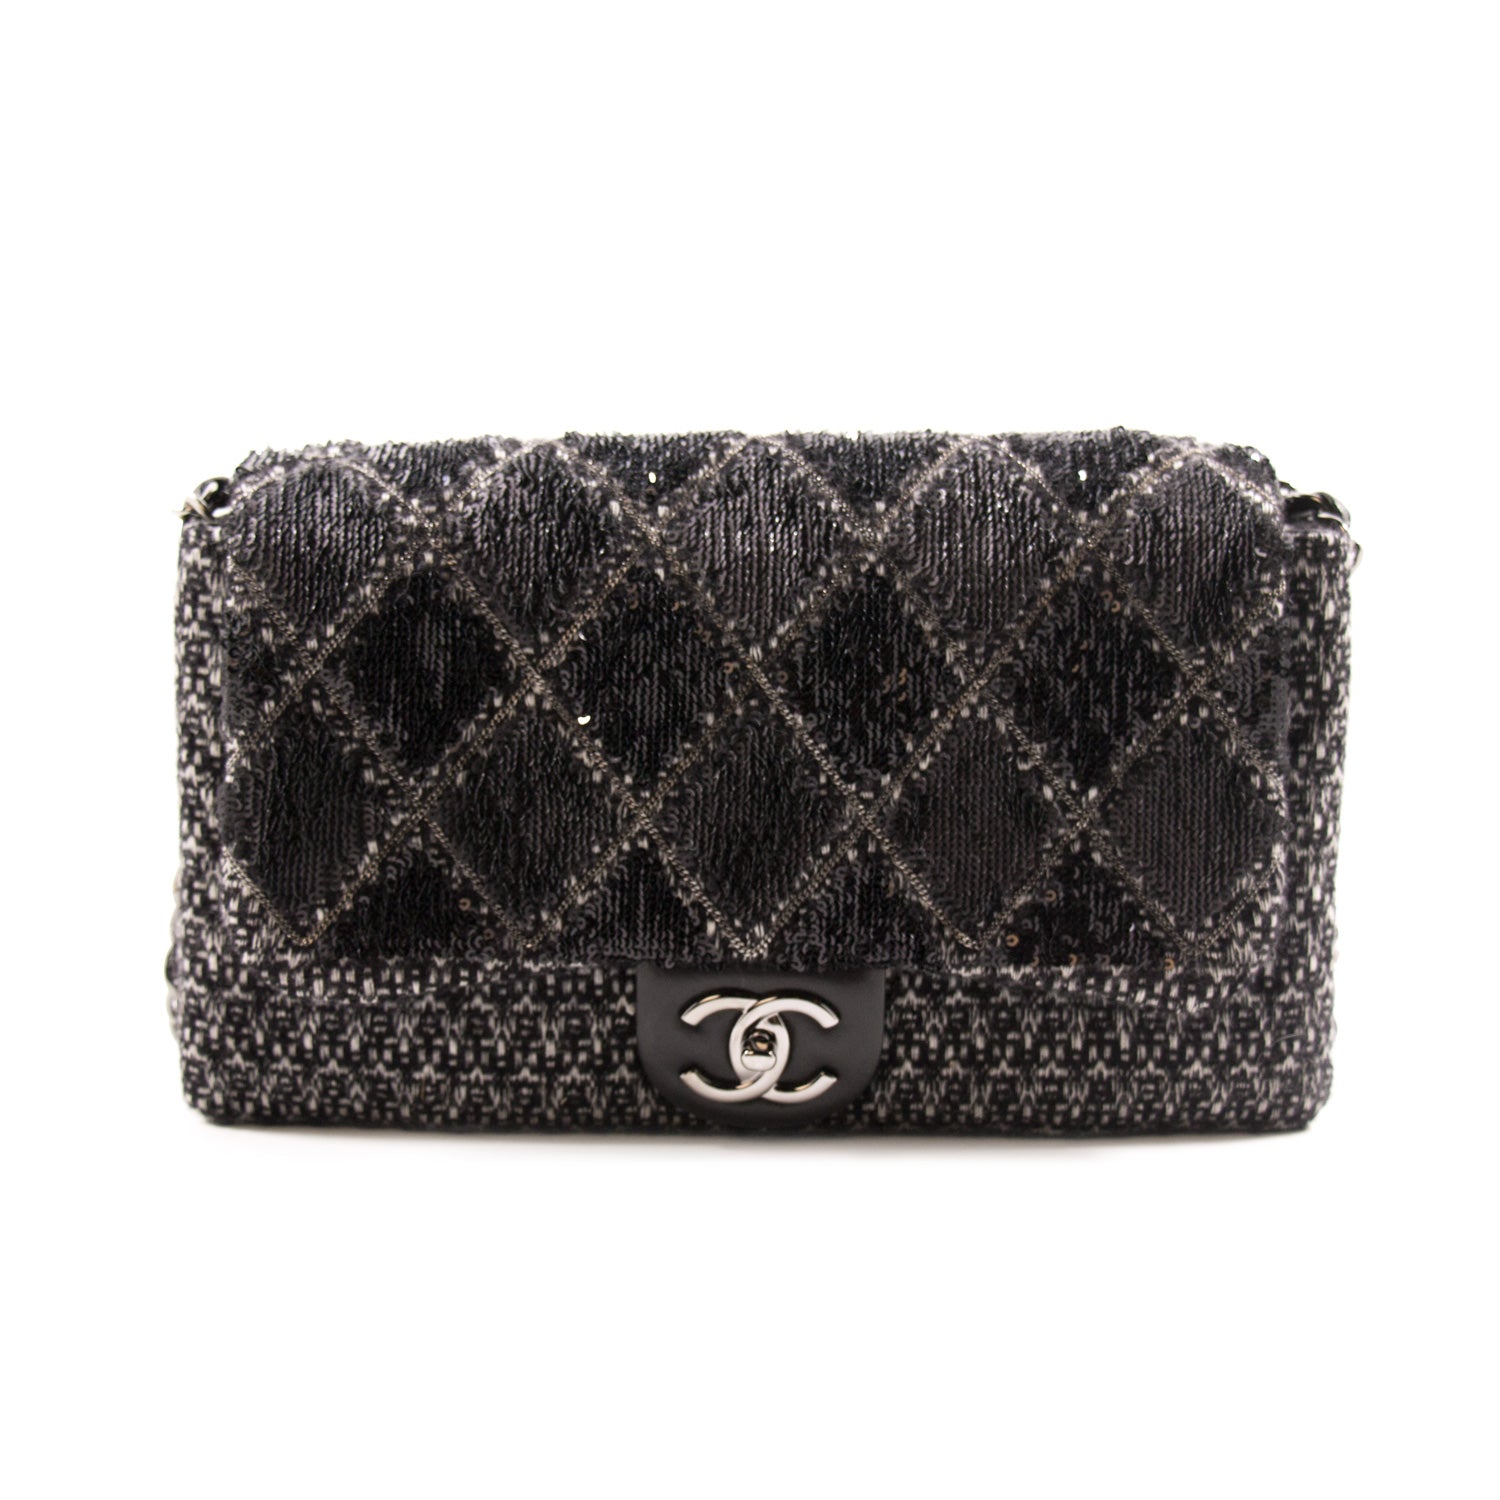 CHANEL Quilted CC Hand Bag Purse Tweed Sequins Vintage Black 2964539  S08765g